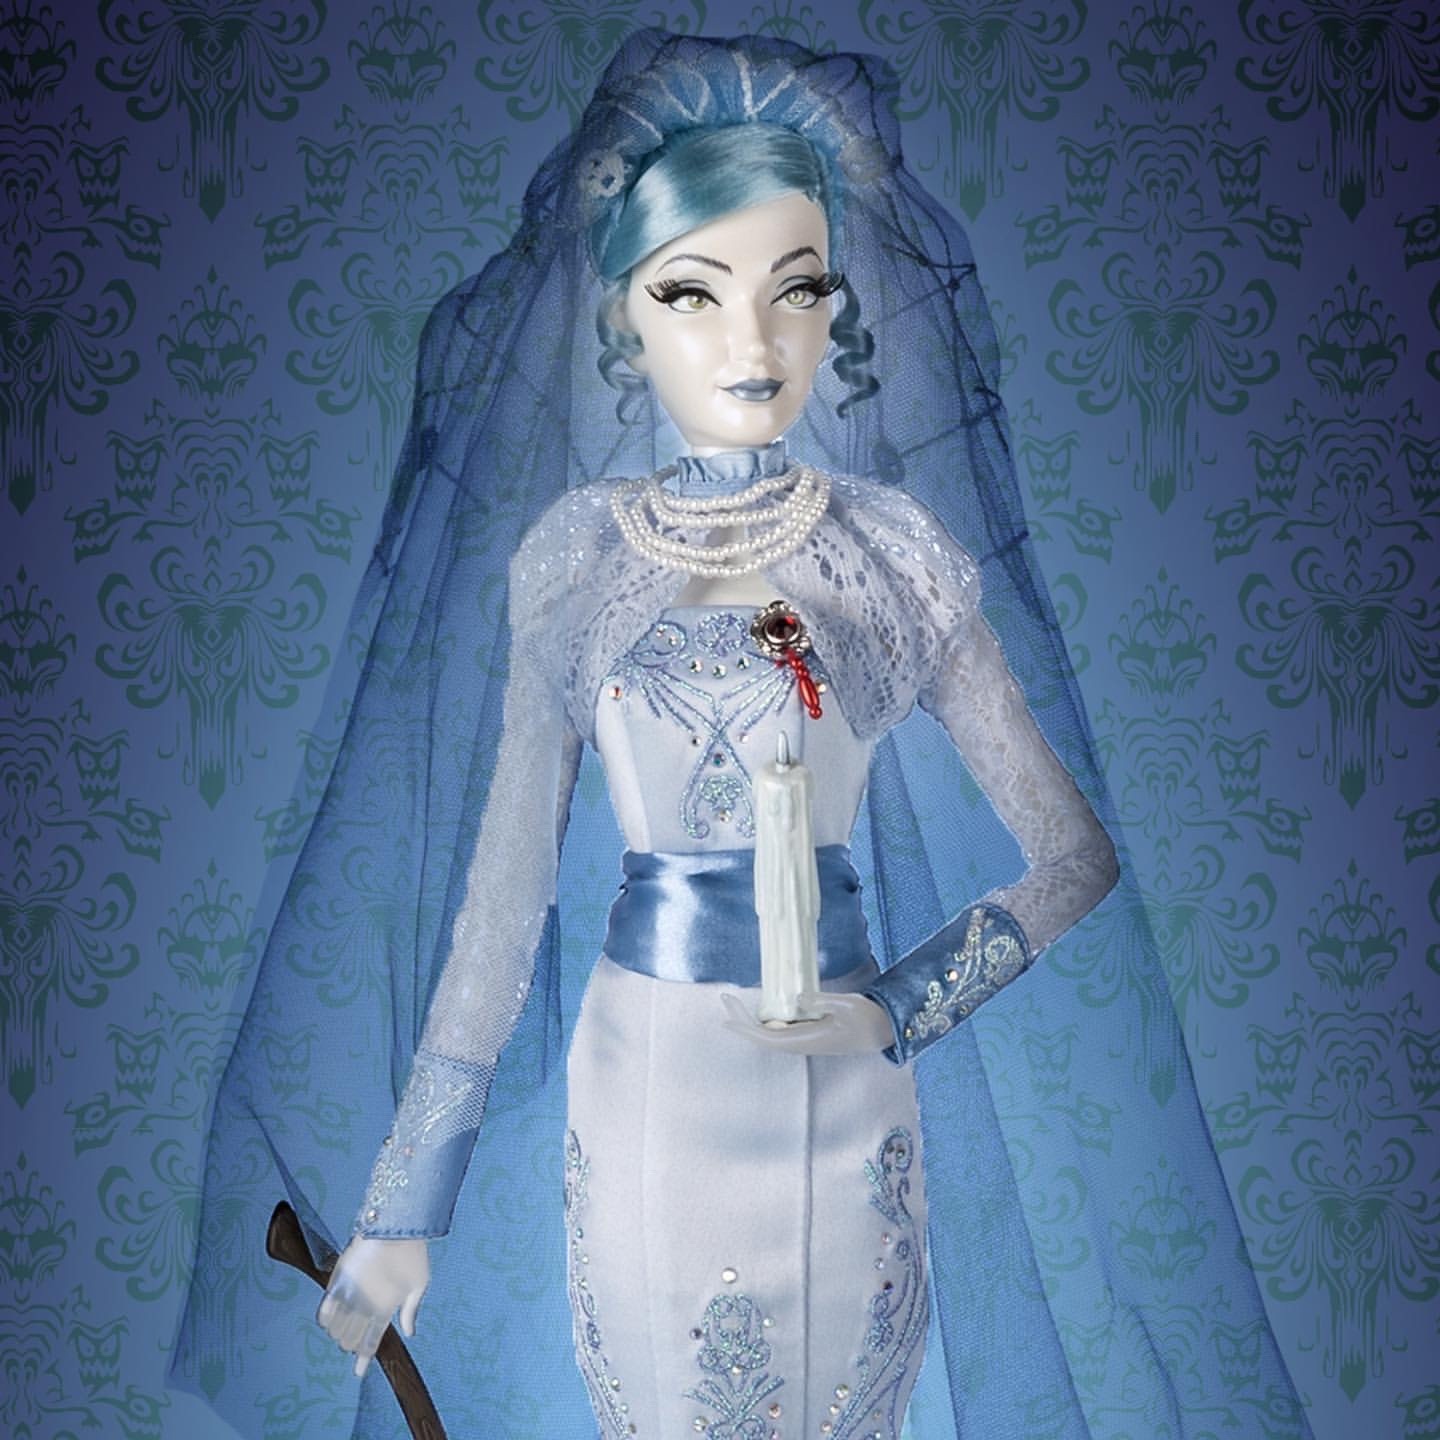 haunted mansion bride constance hatchaway limited edition doll